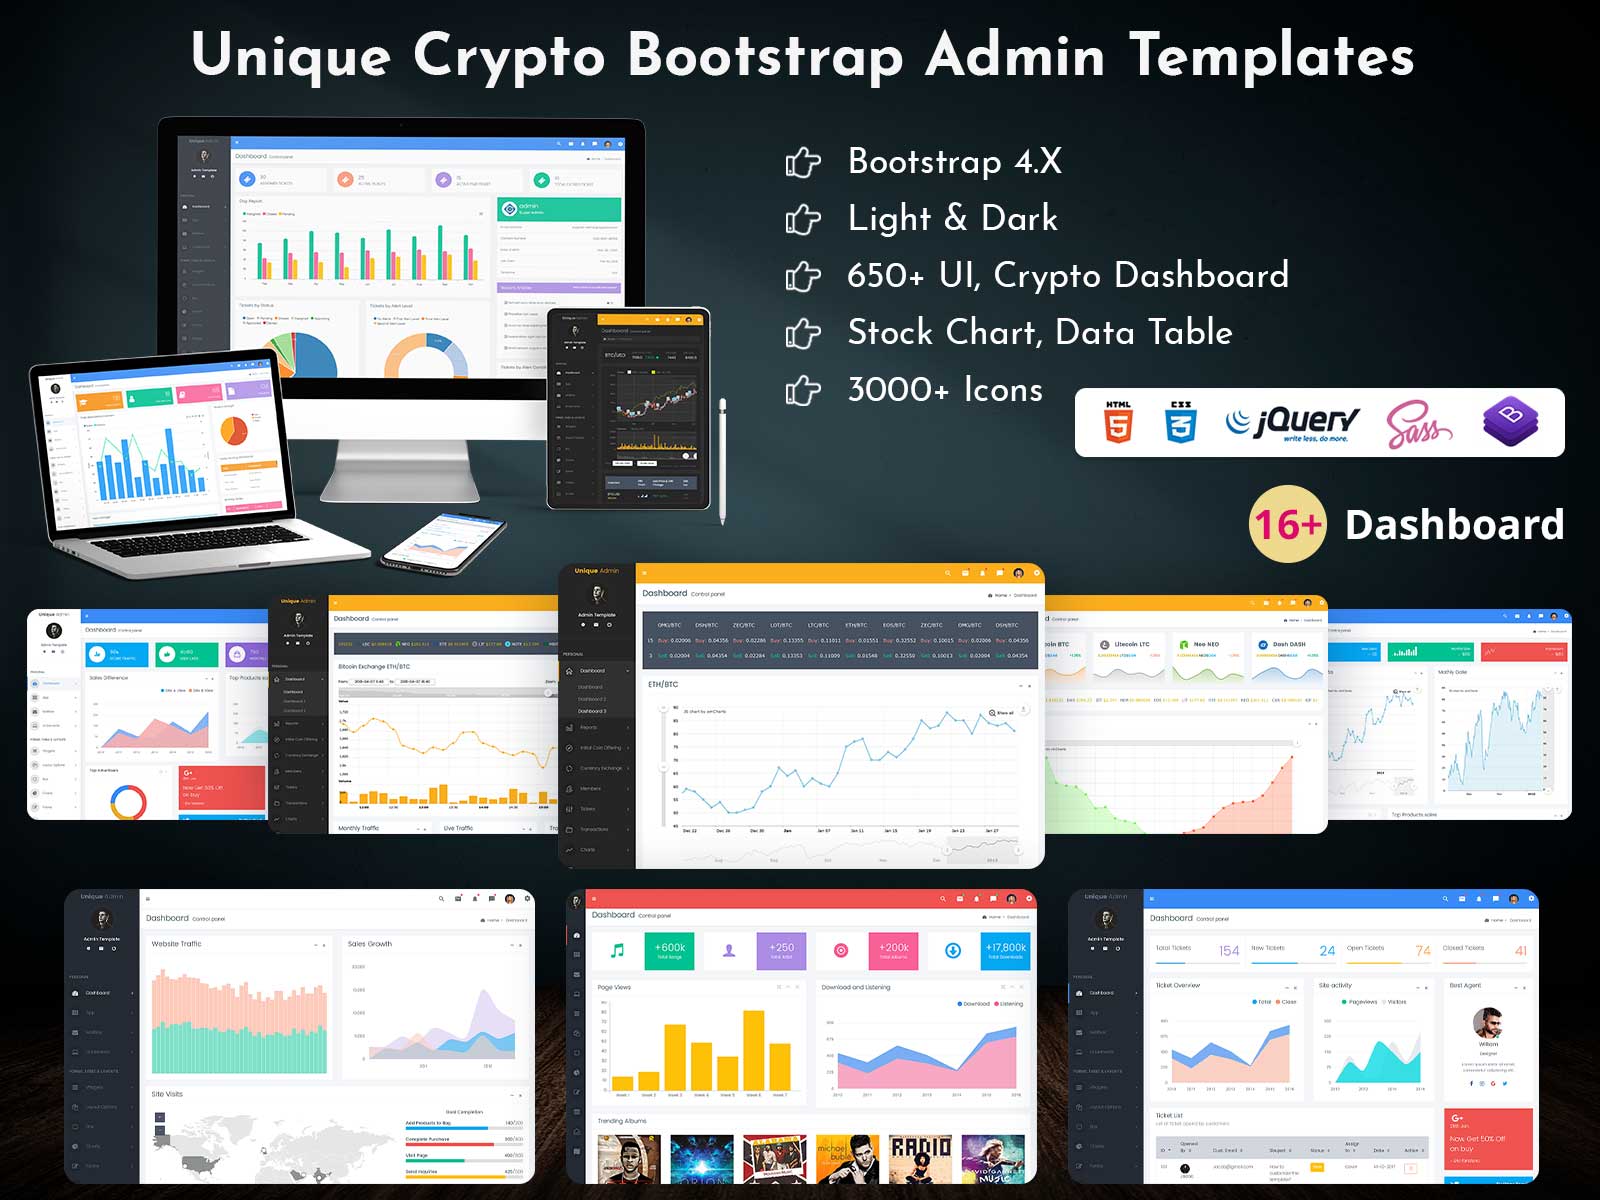 Unique Crypto UI Kit Fully Responsive Featured Admin Dashboard